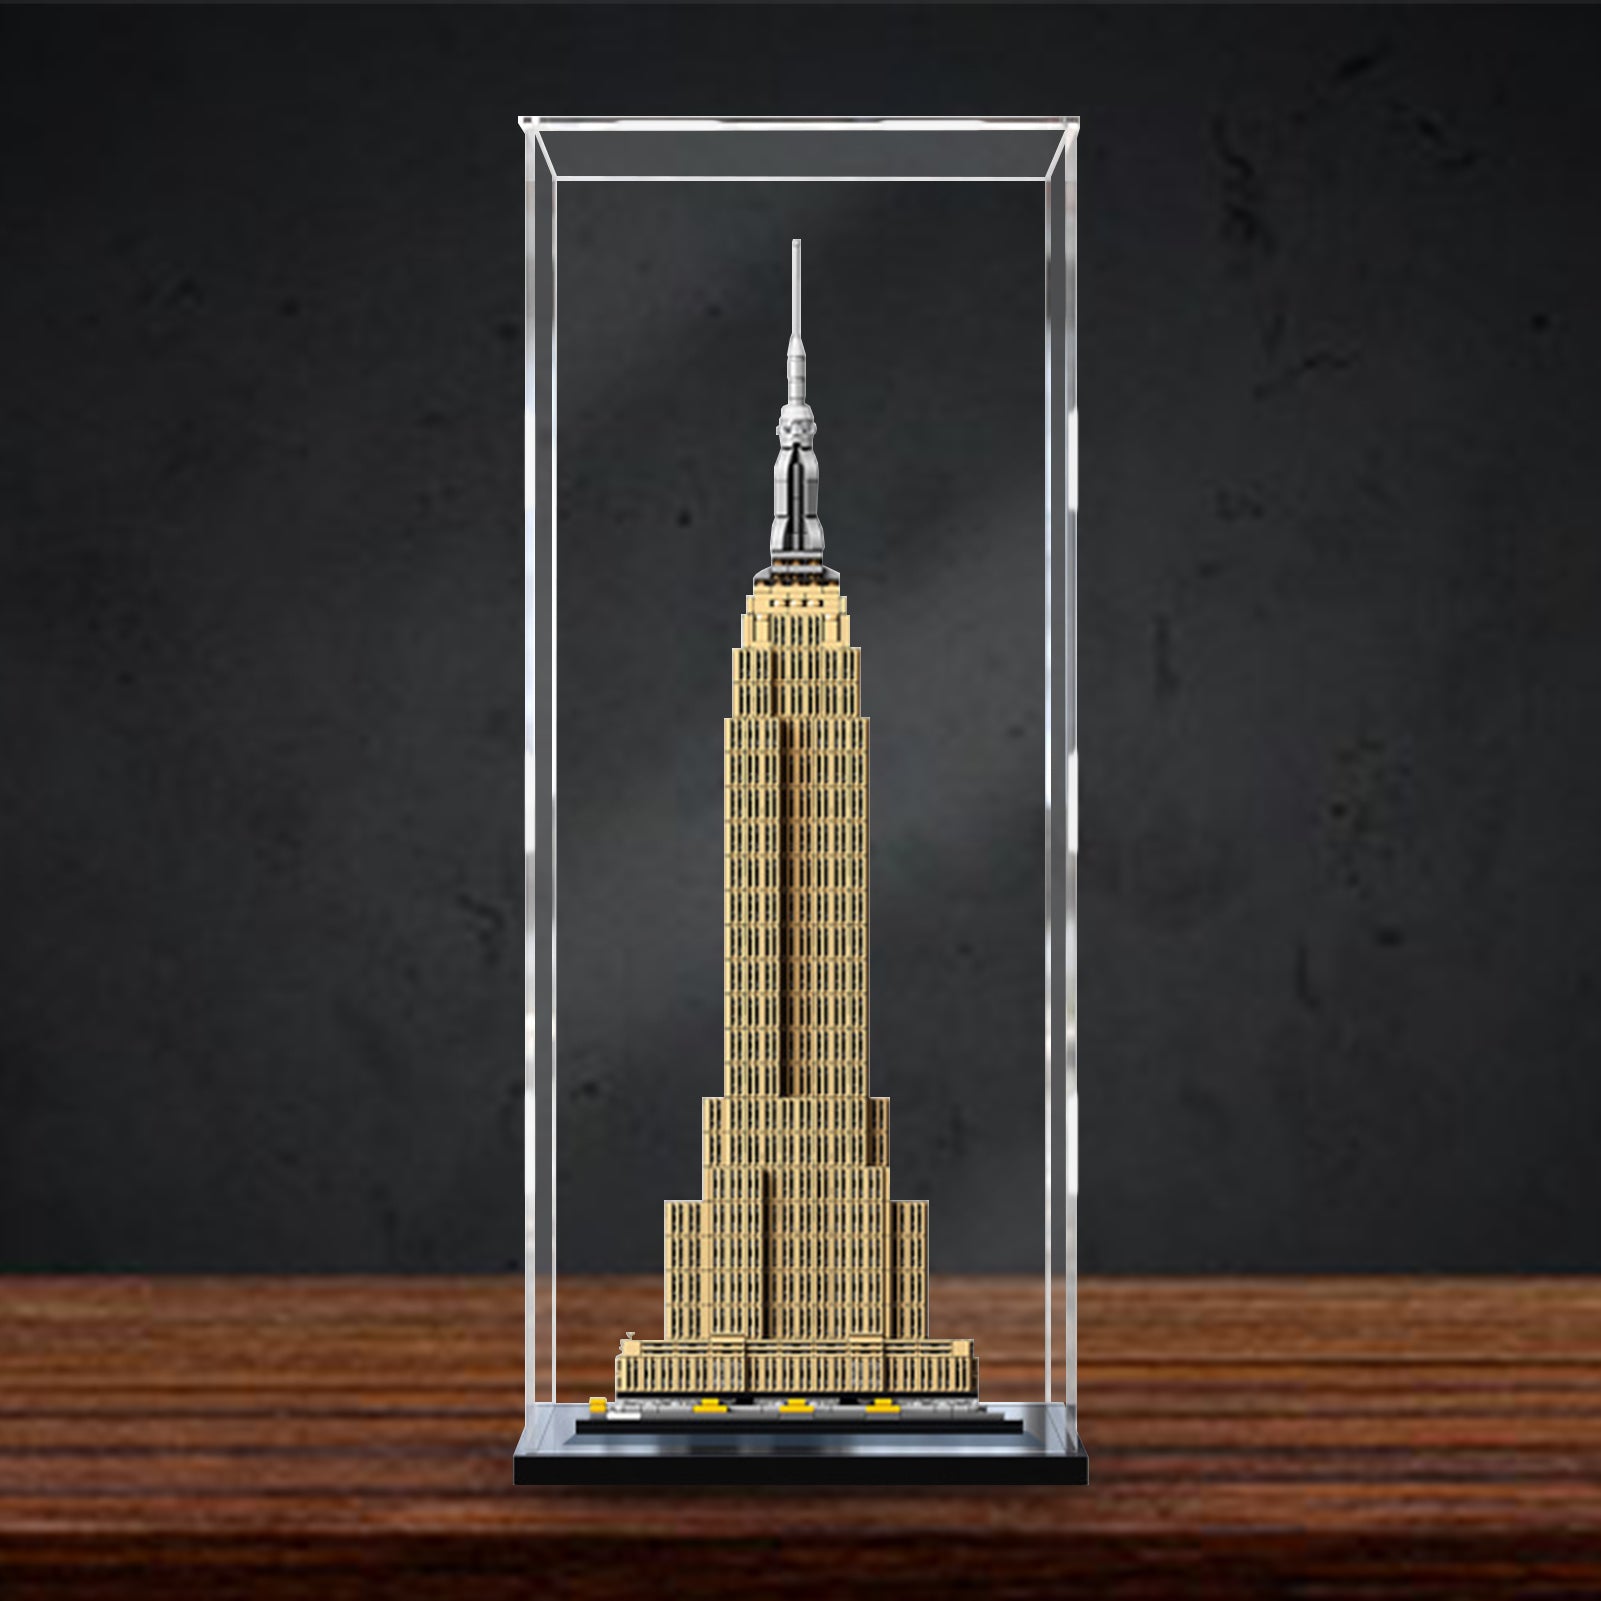 Display Case for Lego Architecture Empire State Building 21046 